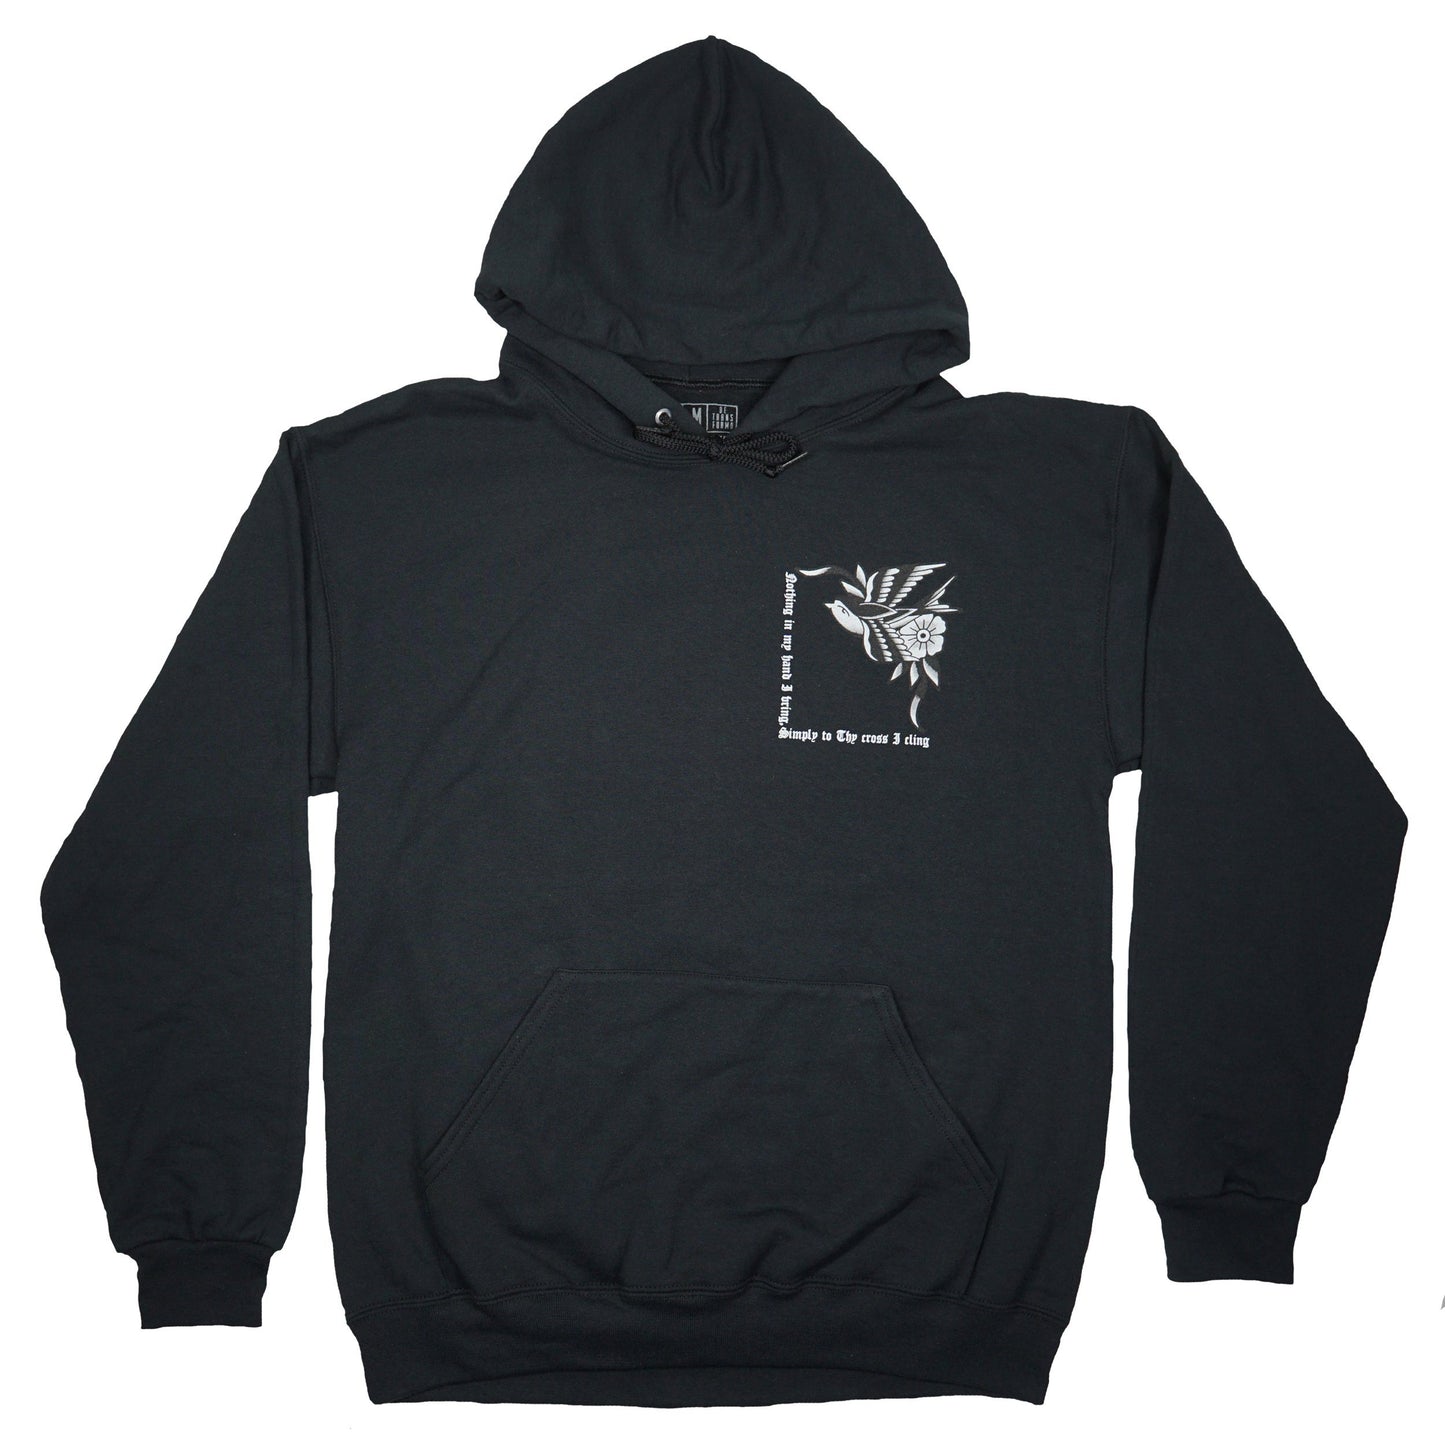 Rock Of Ages v.2 Hoodie